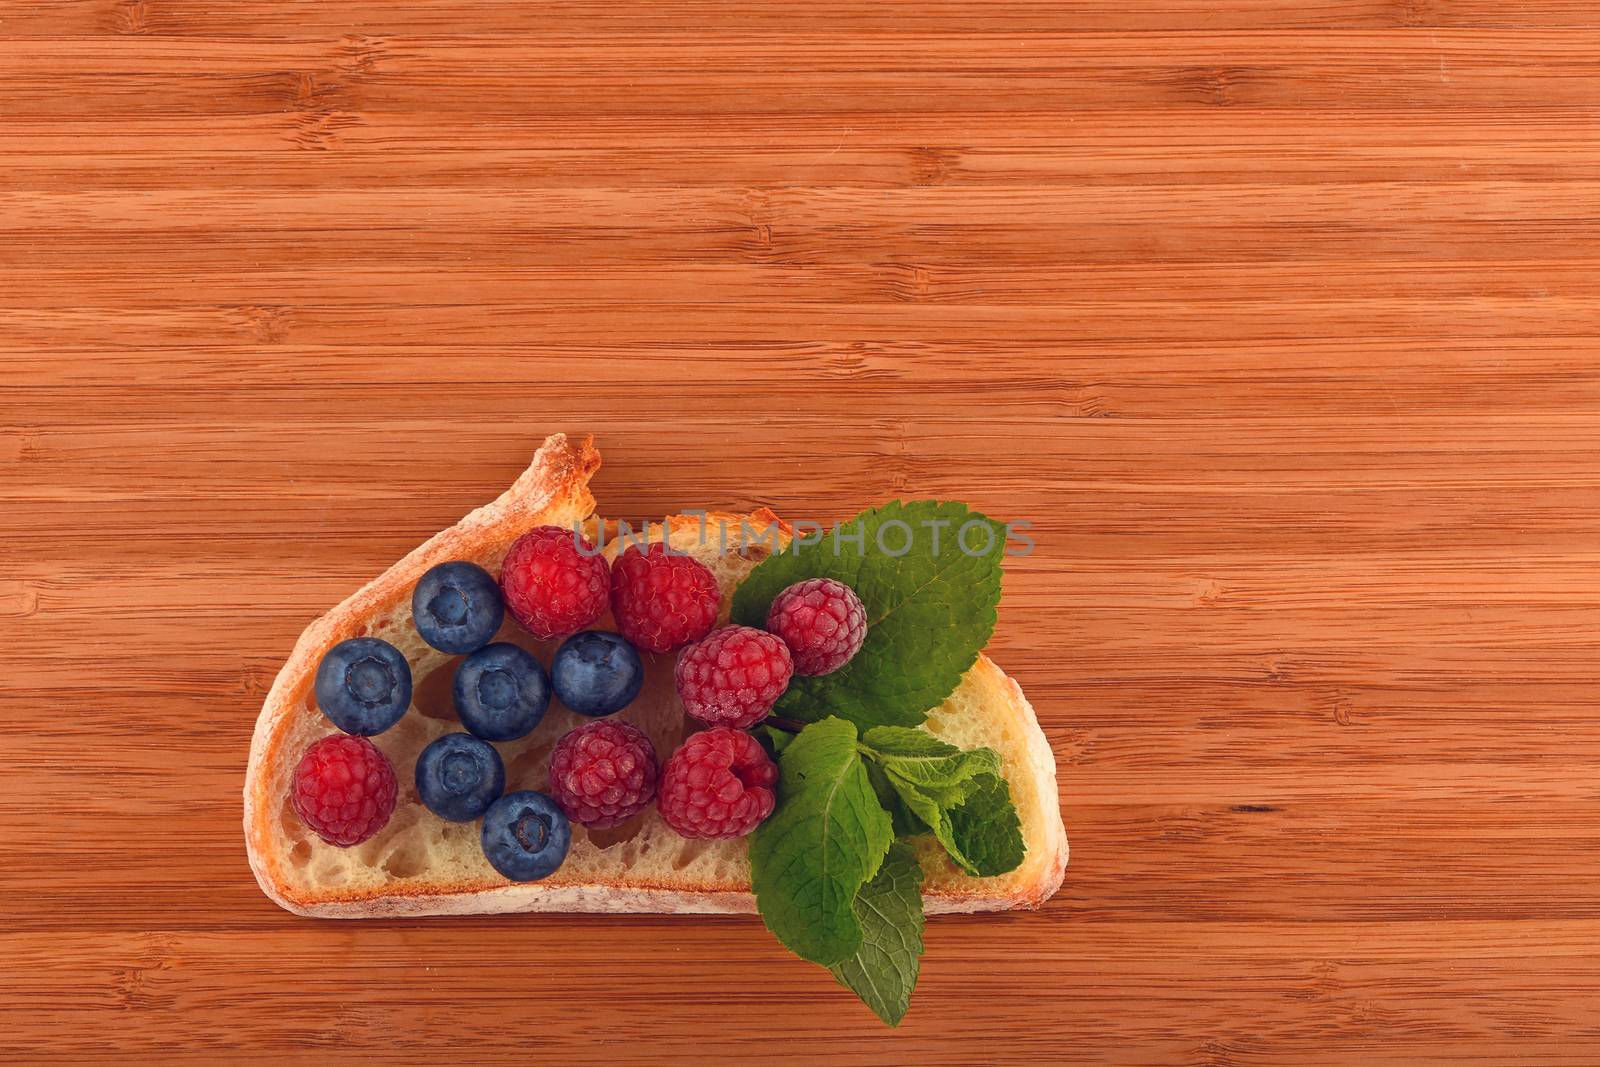 Cutting board with sandwich of blueberries and raspberries on br by BreakingTheWalls